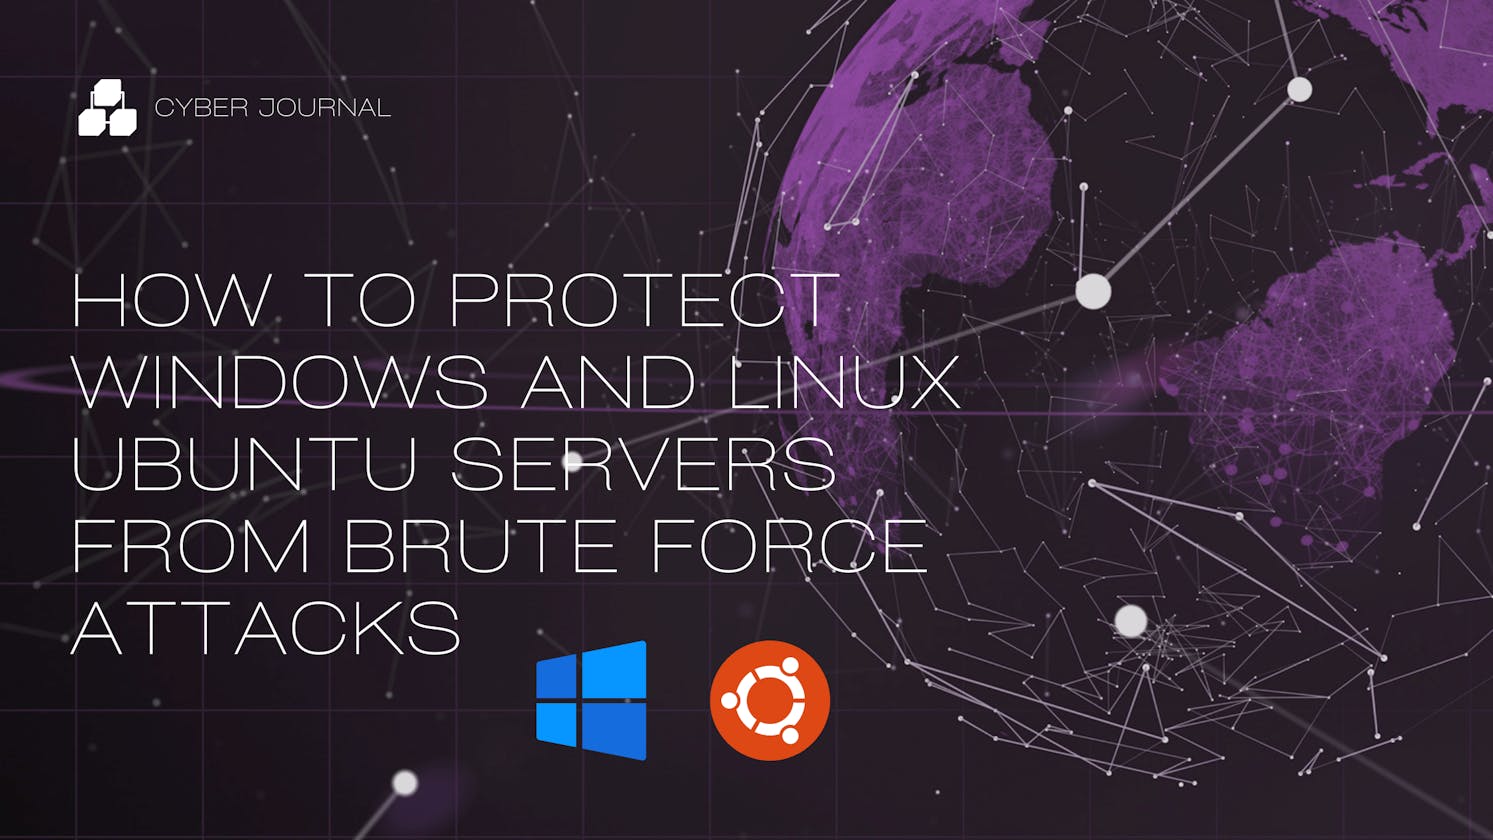 How to Protect Windows and Linux Ubuntu Servers from Brute Force Attacks